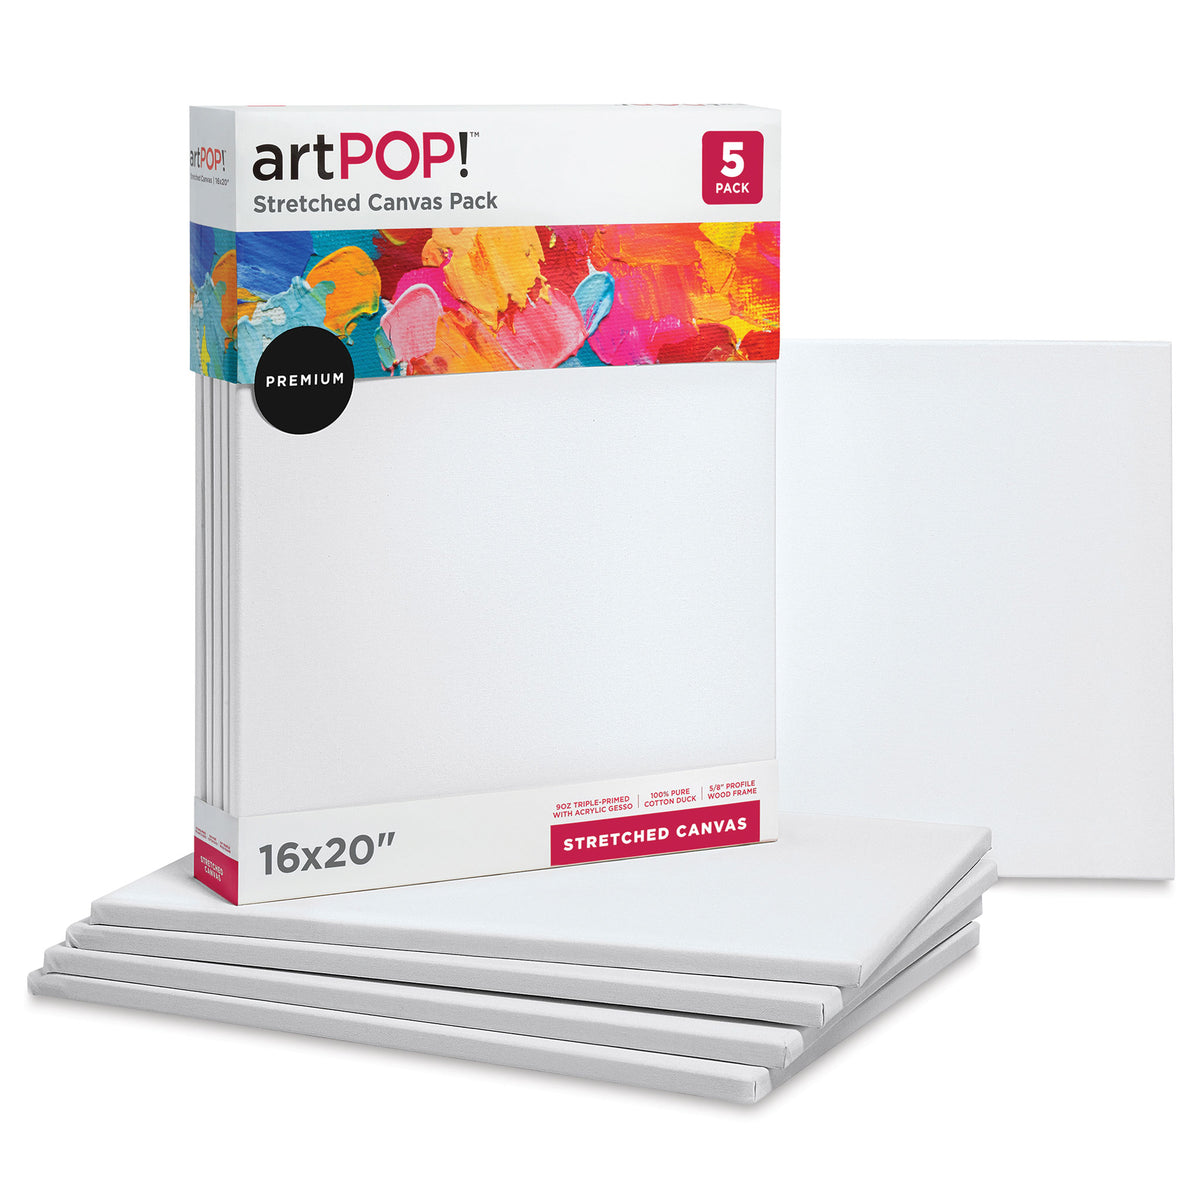 artPOP! Watercolor Paint Kit, All-in-One Paint Set, 30 Pressed Colors with  8 x 10 Paper Pad, Paintbrushes, and Palette Case for Kids or Adult Arts and